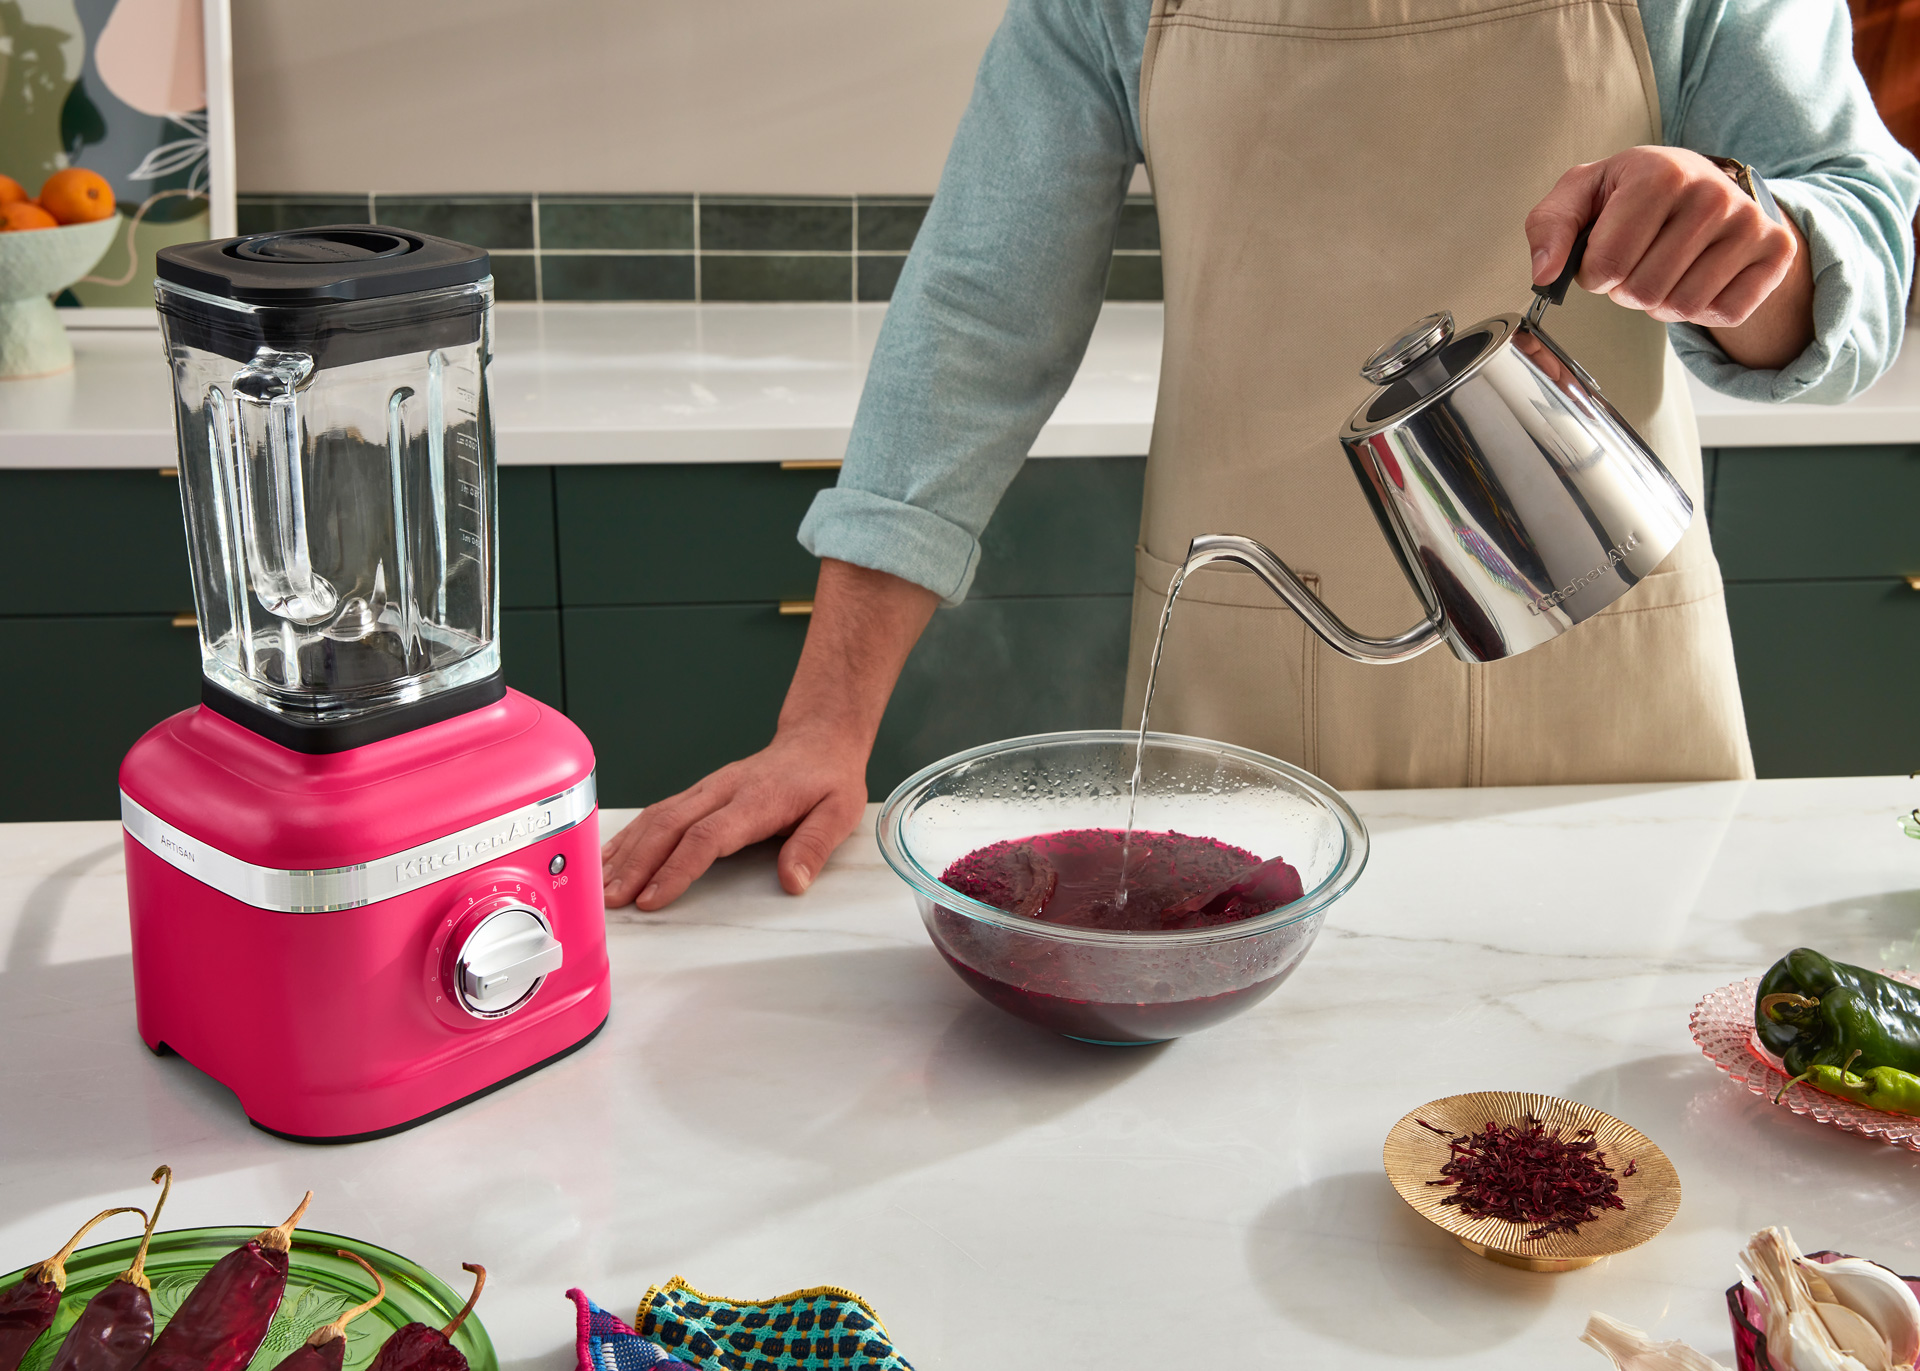 Say Hi to Unveils KitchenAid of Year Color the | 2023 Pro Whirlpool Brand Hibiscus